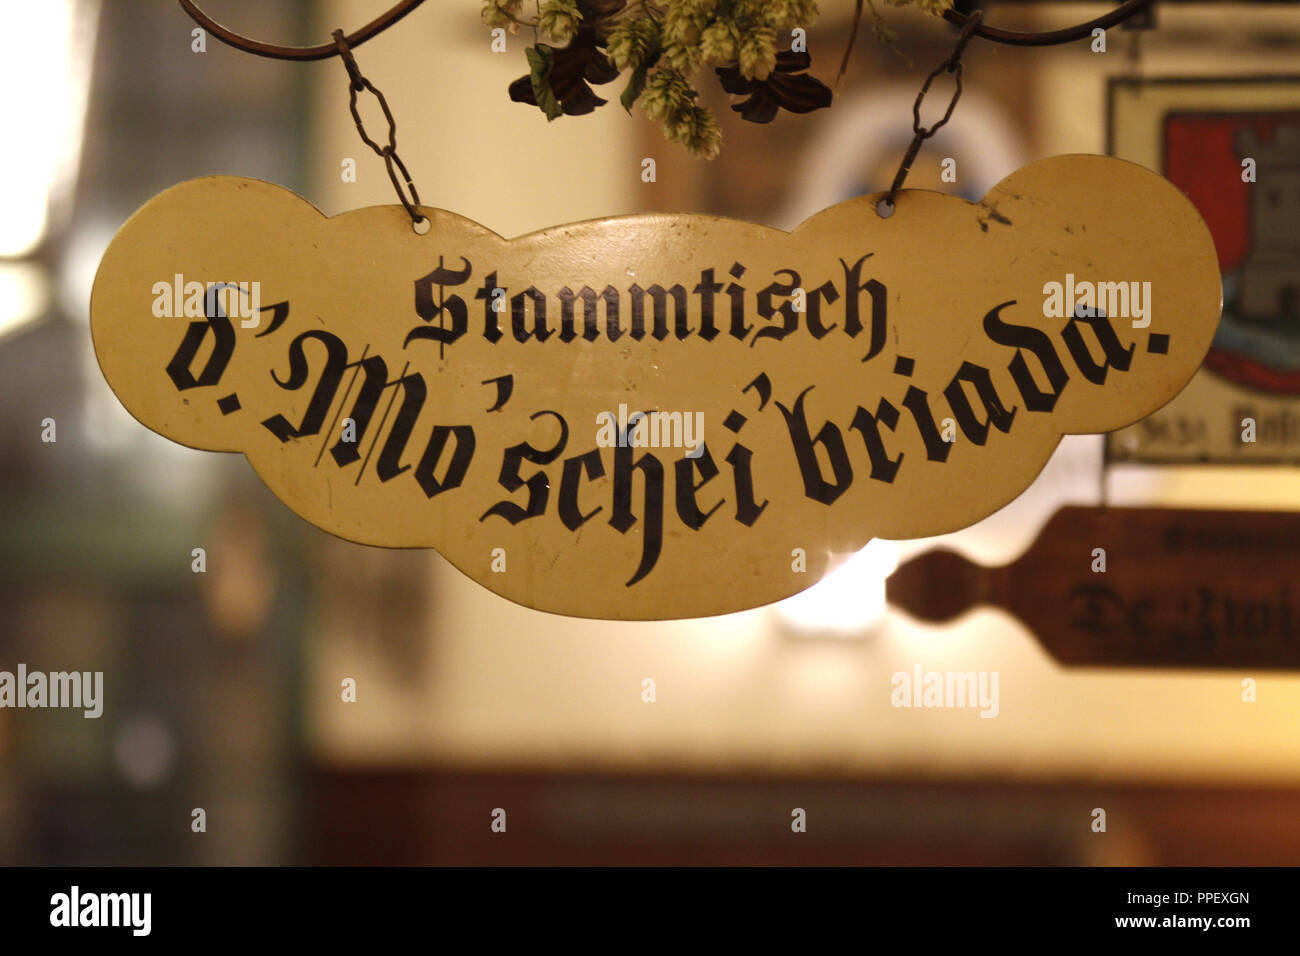 Stammtisch sign of the regulars' table 'd.Mo'schei briada' at the Hofbraeuhaus. Stock Photo